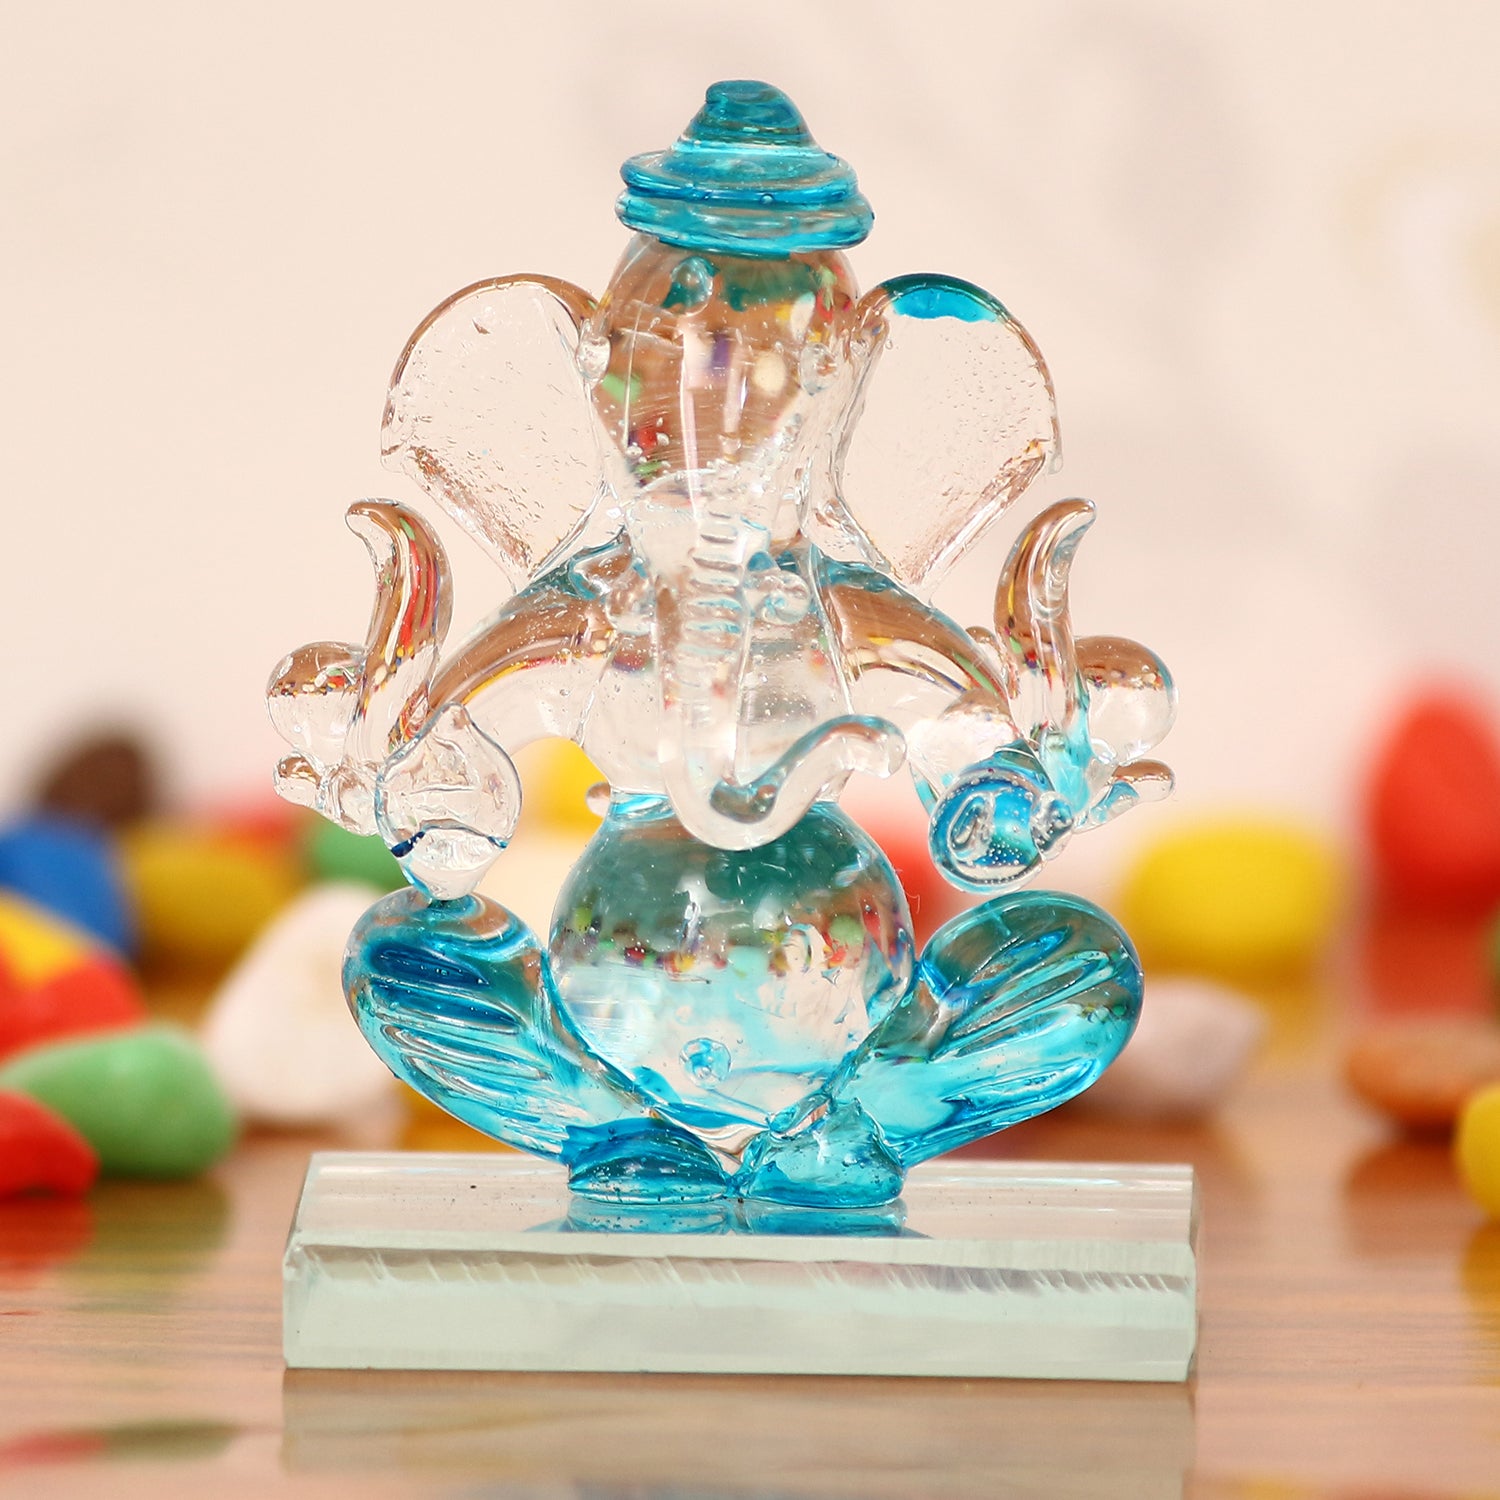 Sky Blue Transparent Double Sided Crystal Ganesha Idol For Home, Office and Car Dashboard 1